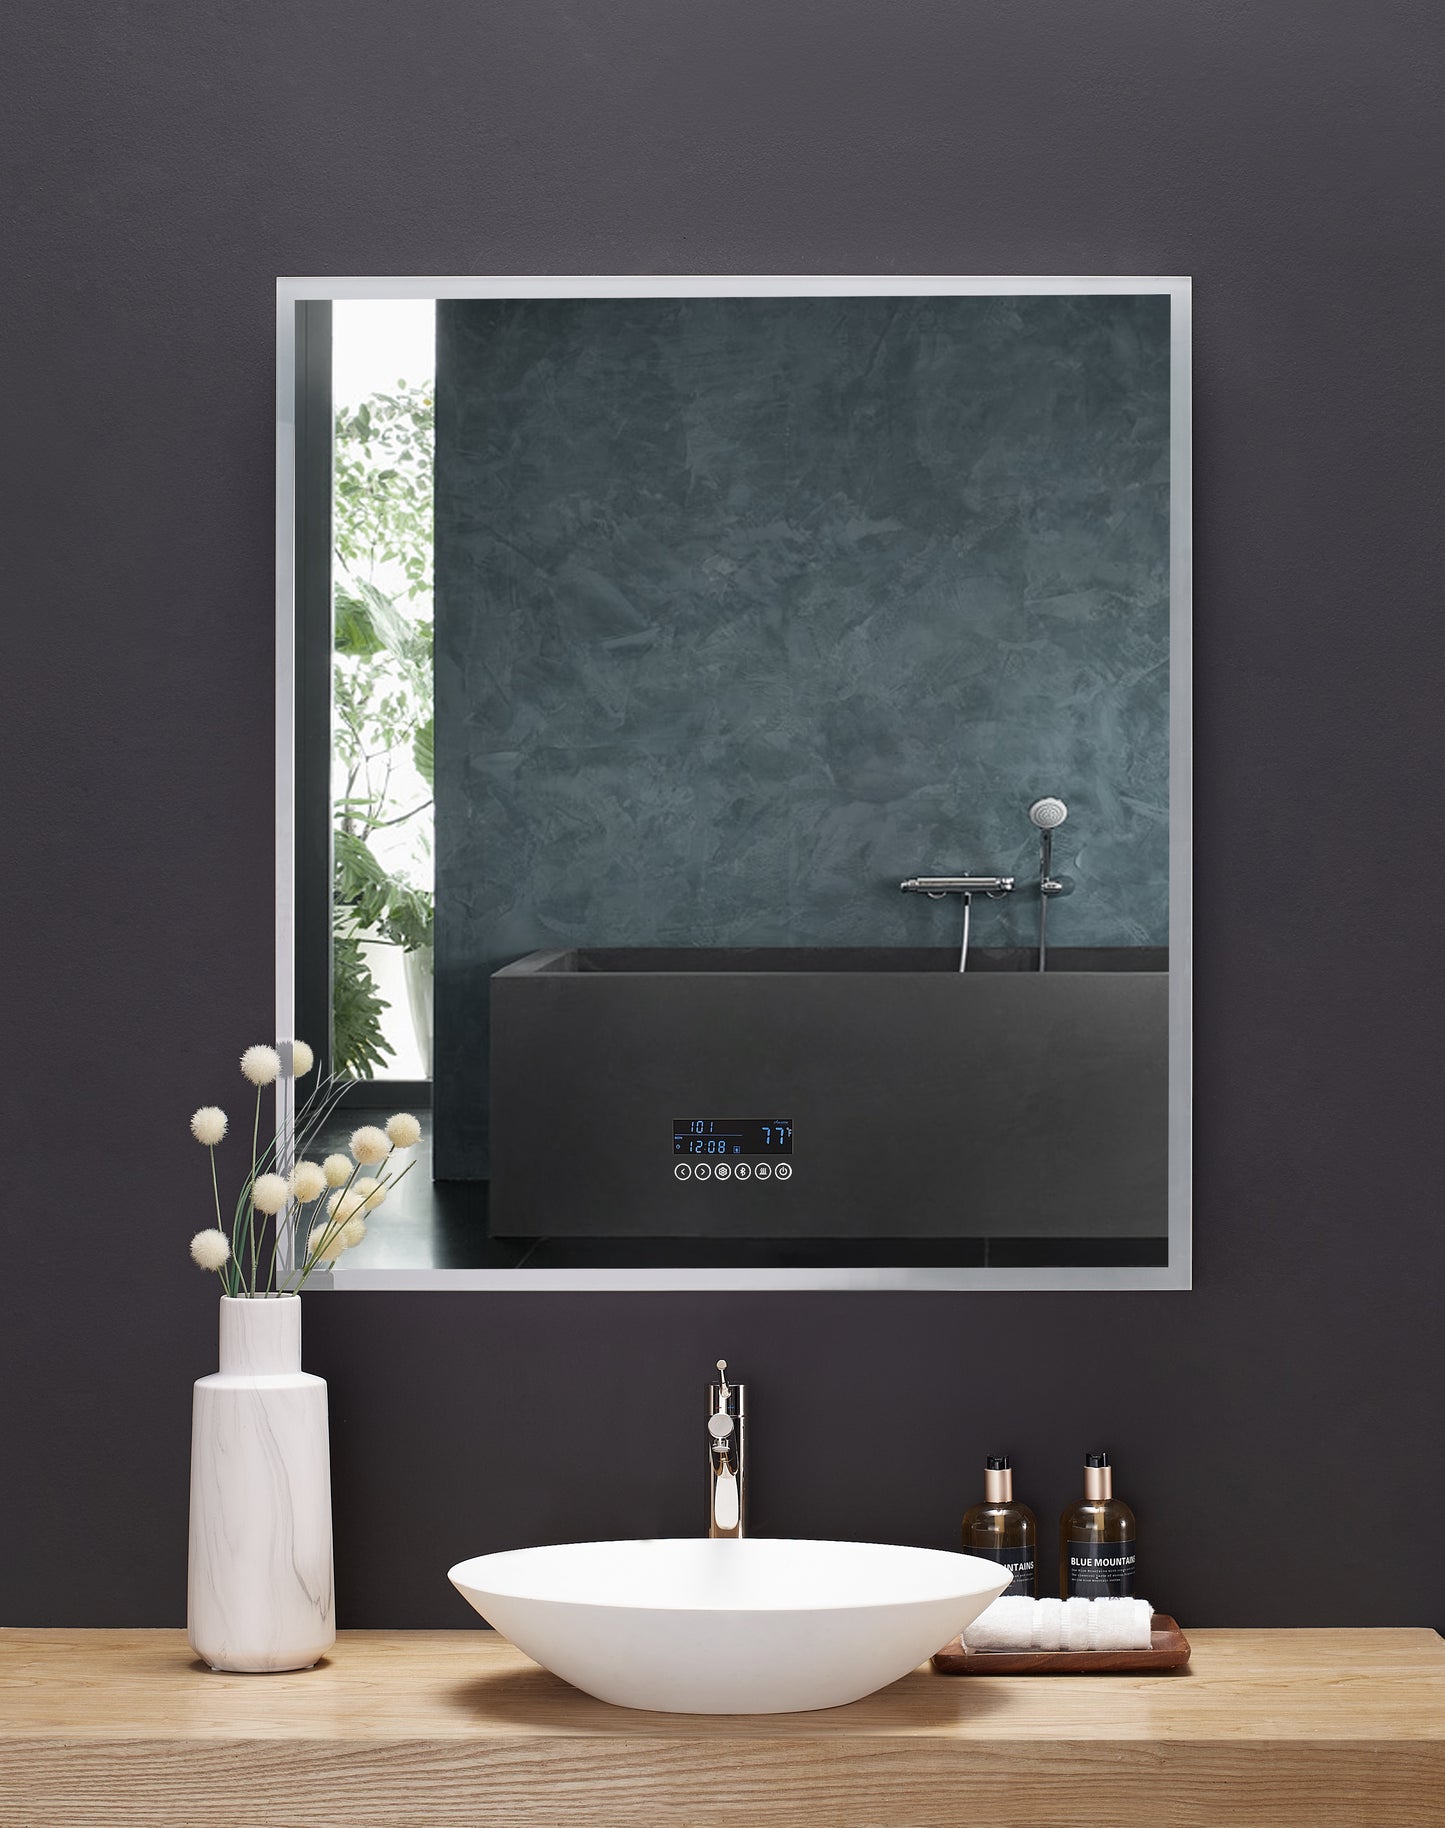 IMMERSION 36 in. x 40 in. LED Frameless Mirror with Bluetooth, Defogger  and Digital Display